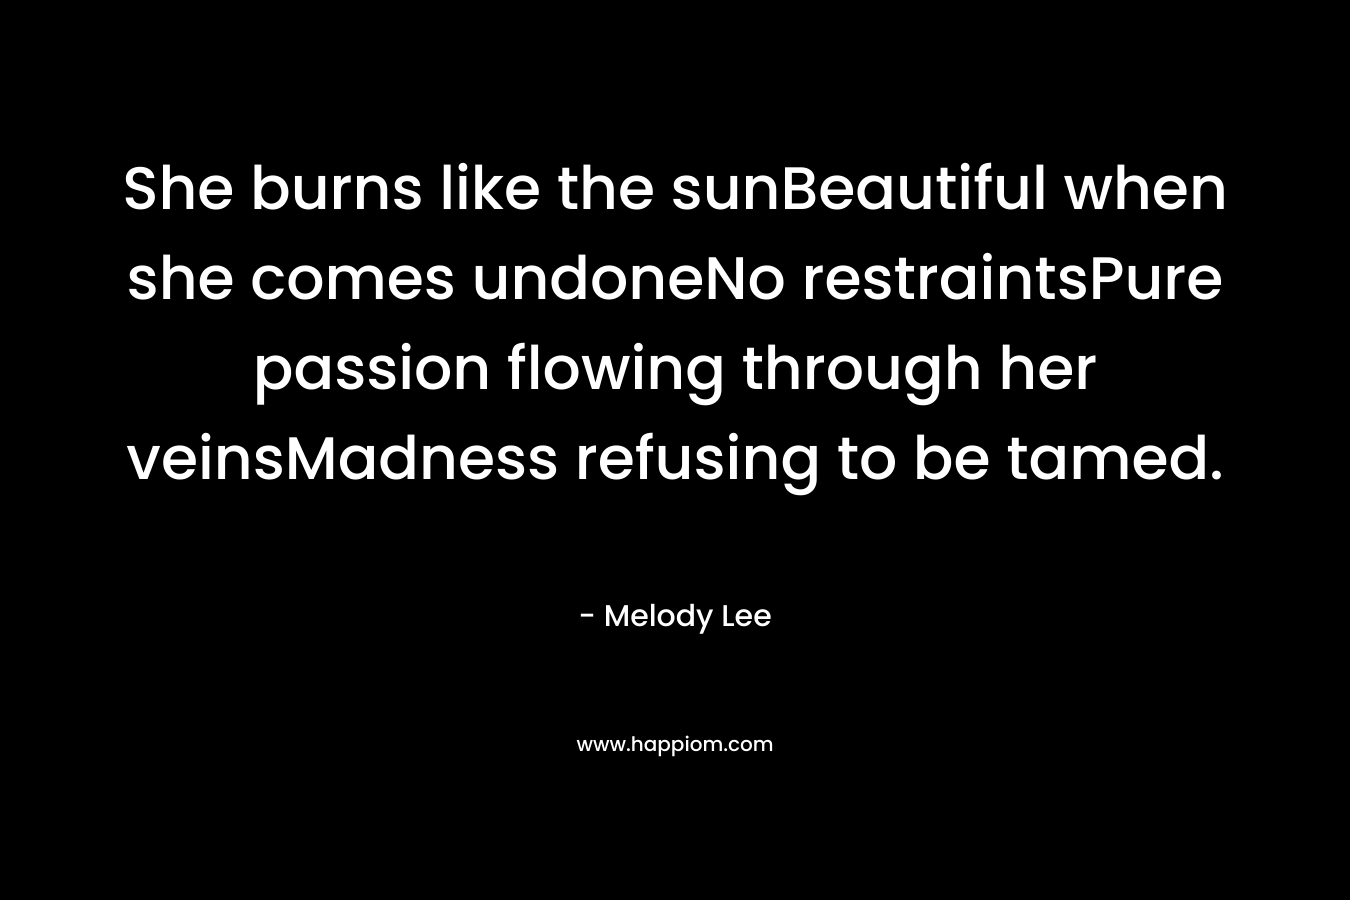 She burns like the sunBeautiful when she comes undoneNo restraintsPure passion flowing through her veinsMadness refusing to be tamed.